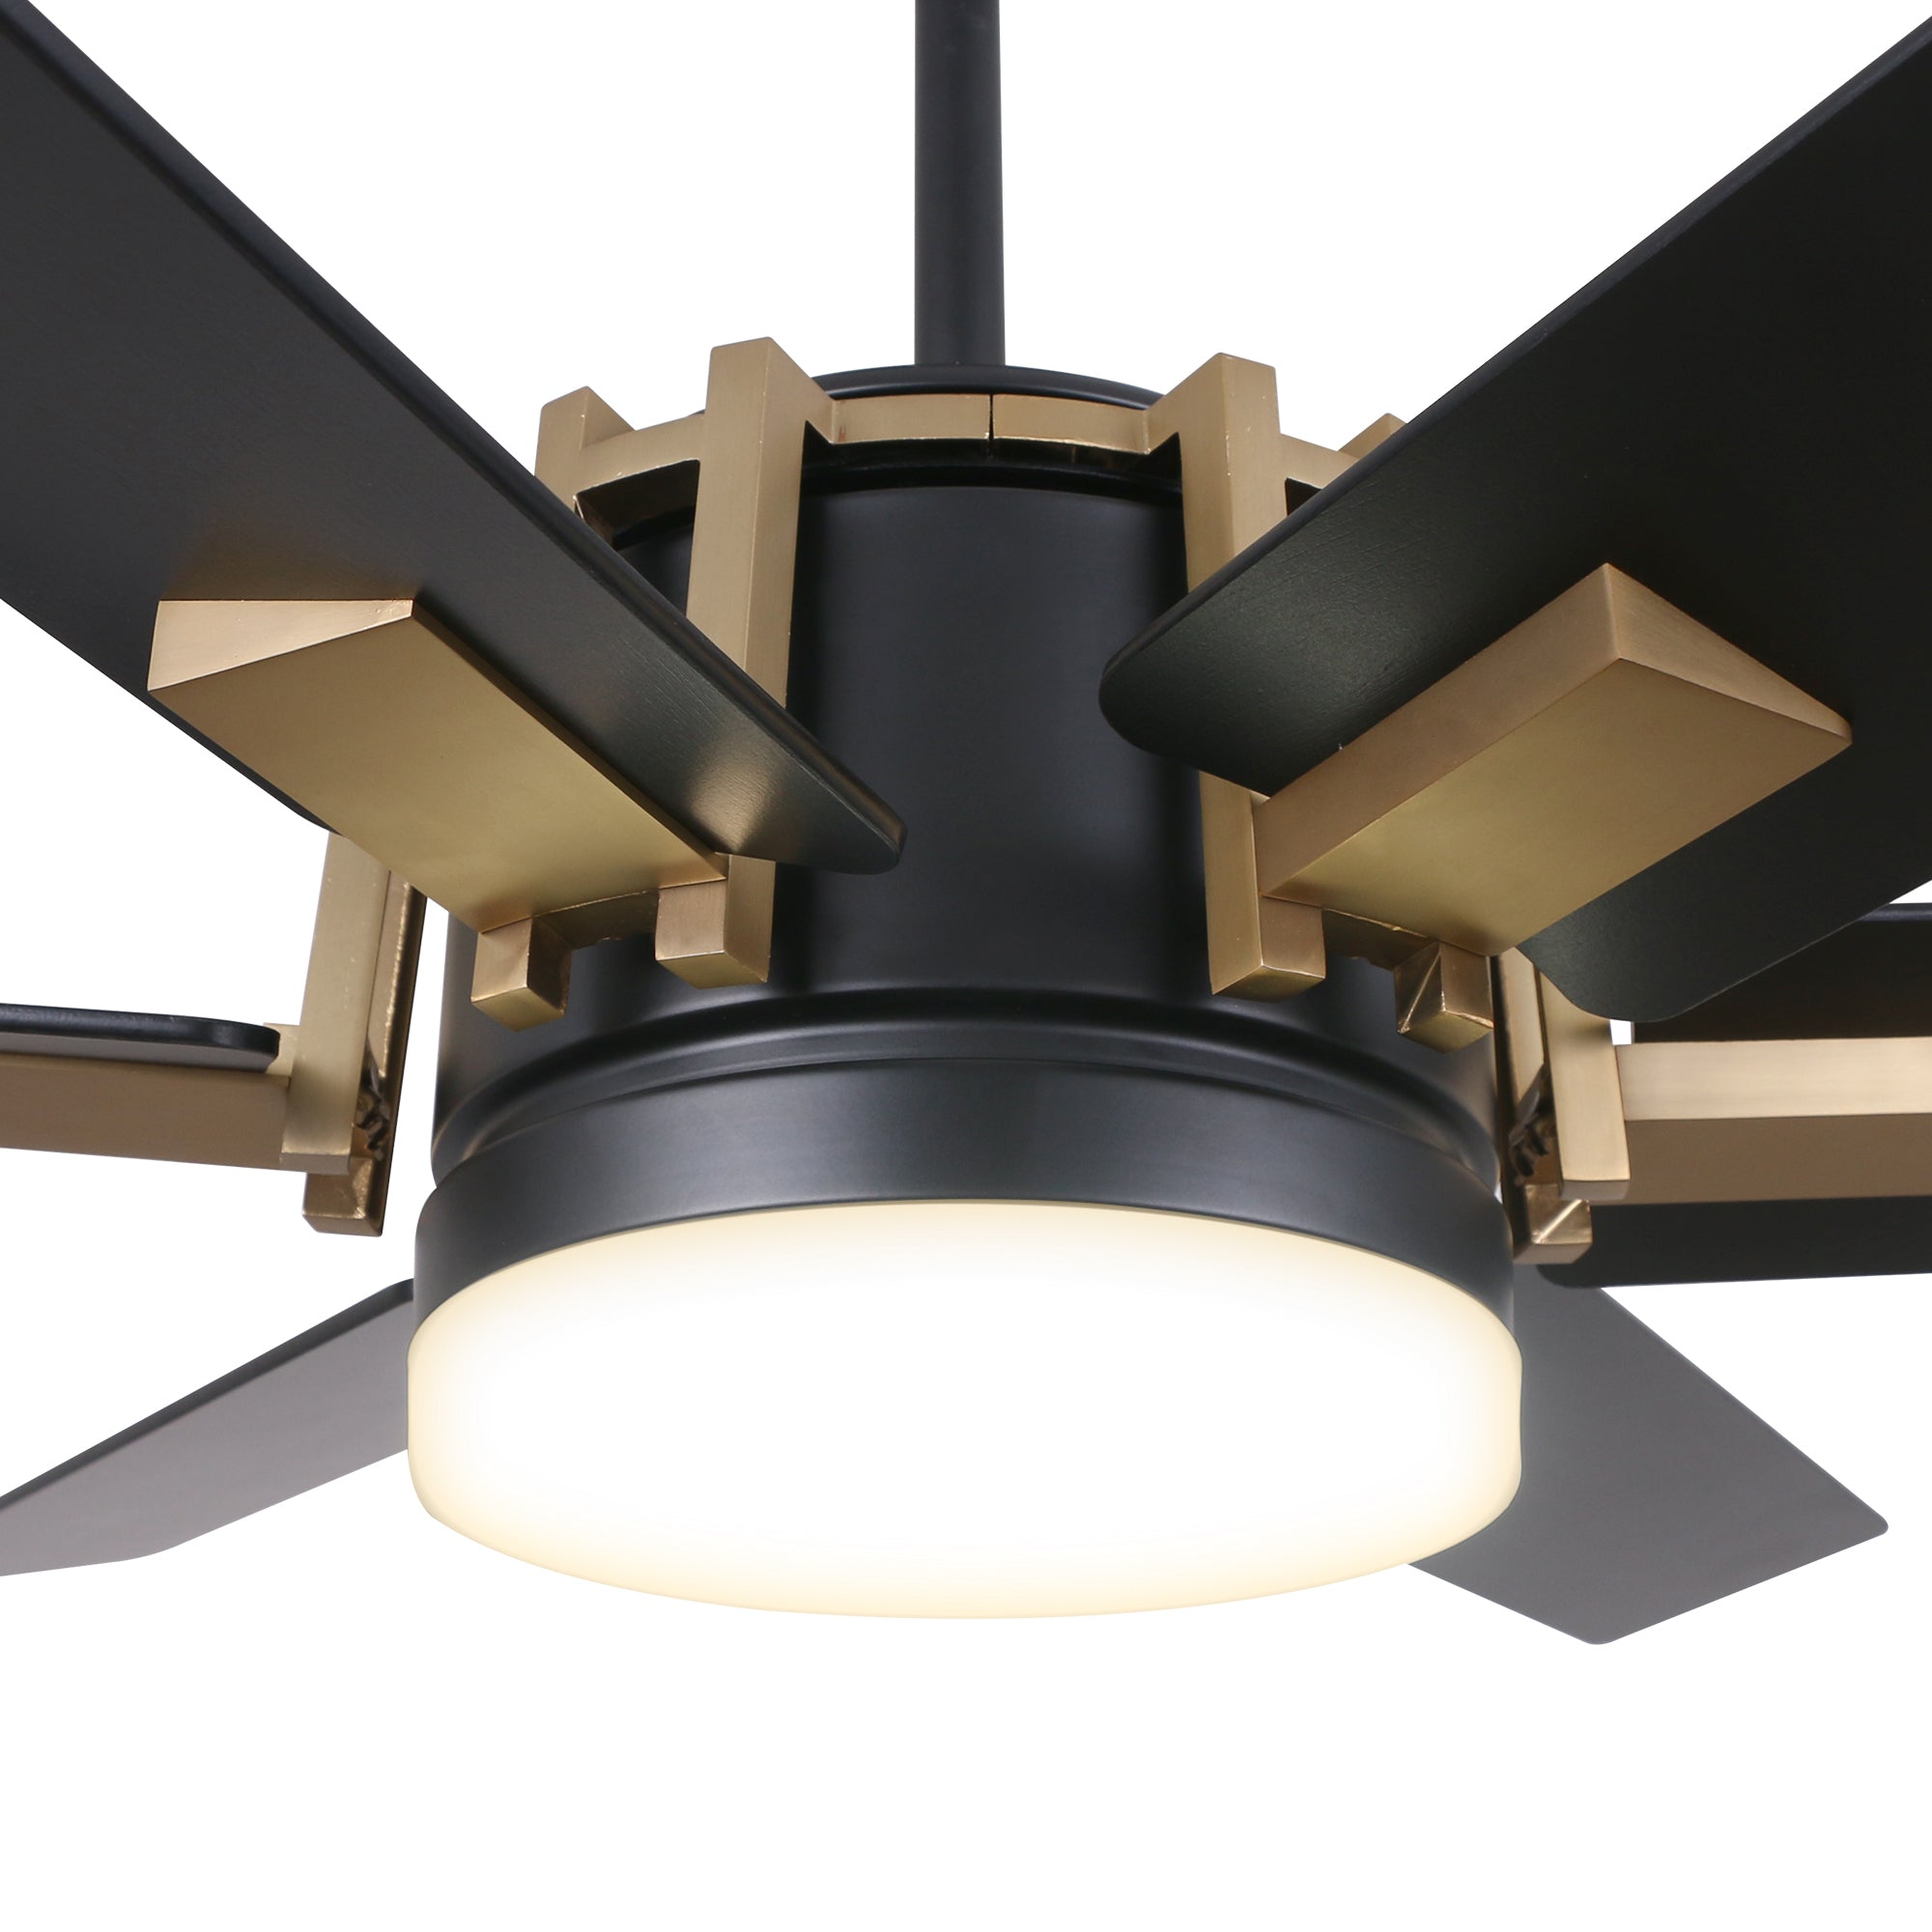 This Sennin 52&#39;&#39; ceiling fan keeps your space cool, bright, and stylish. It is a soft modern masterpiece perfect for your indoor living spaces. This ceiling fan is a simplicity designing with Black finish, use elegant Plywood blades and has an integrated 6000K LED daylight. The fan features remote control.